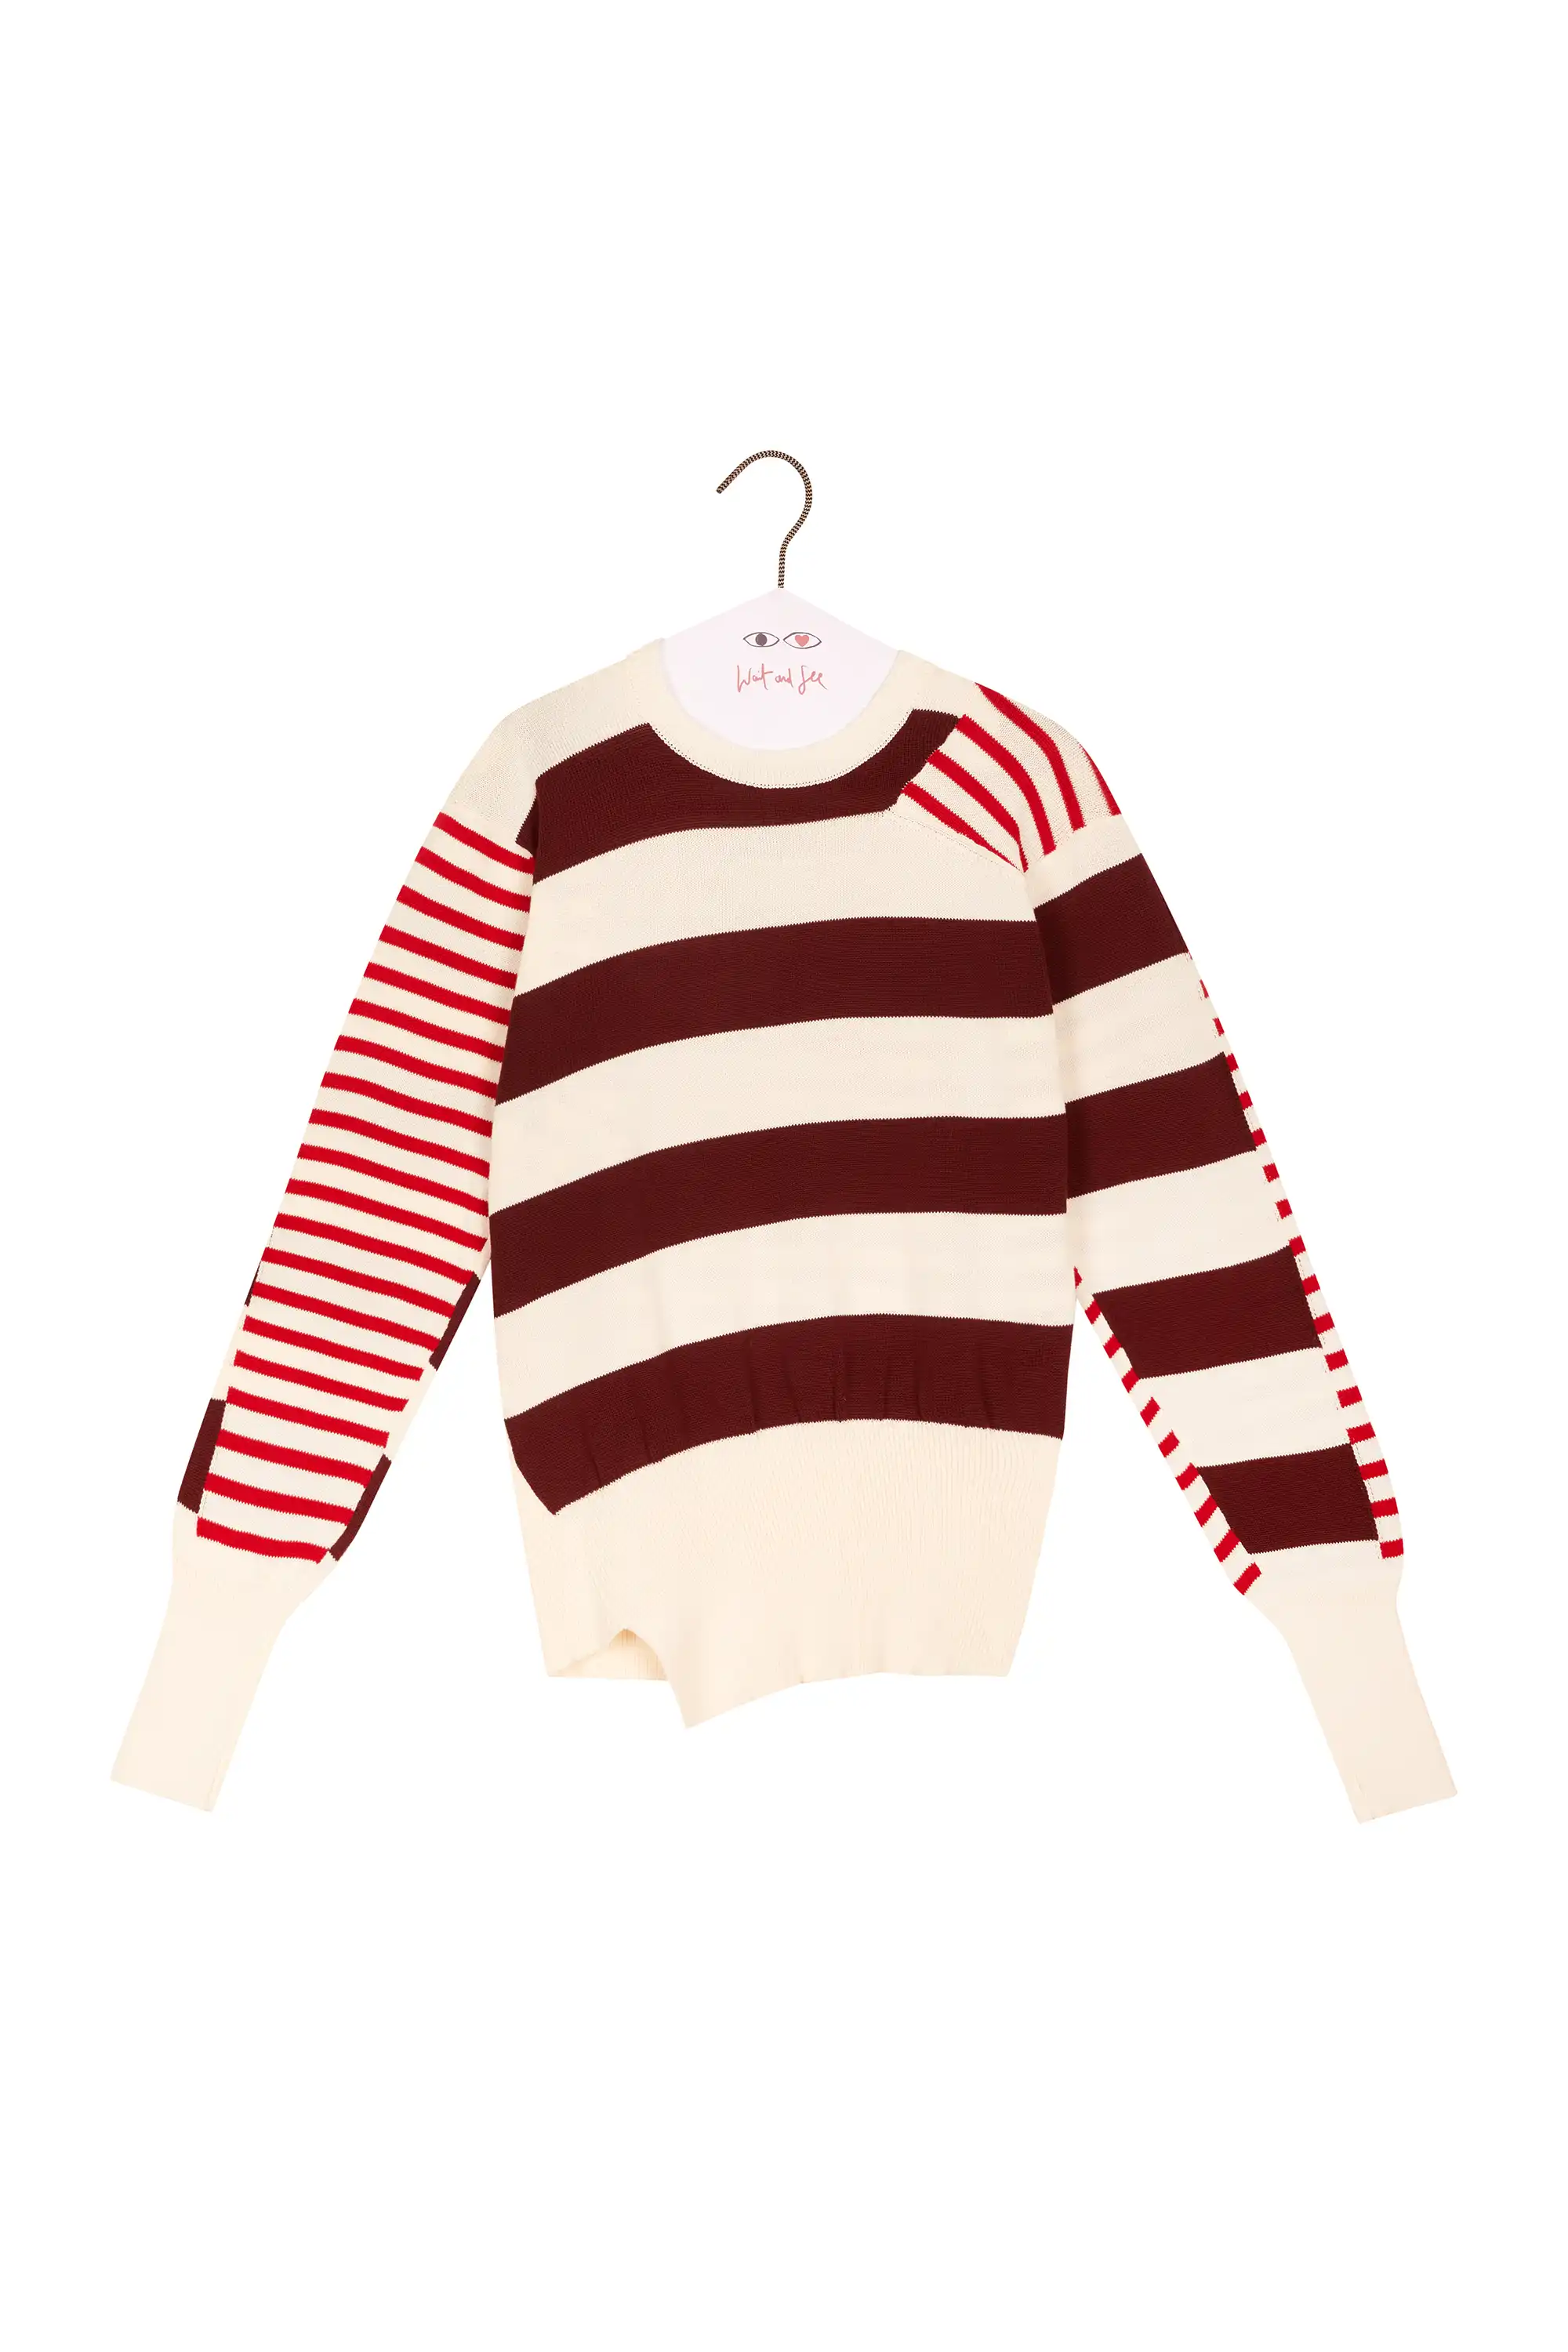 SHEIN Frenchy Square Neck Pointelle Knit Sweater for Sale New Zealand, New  Collection Online